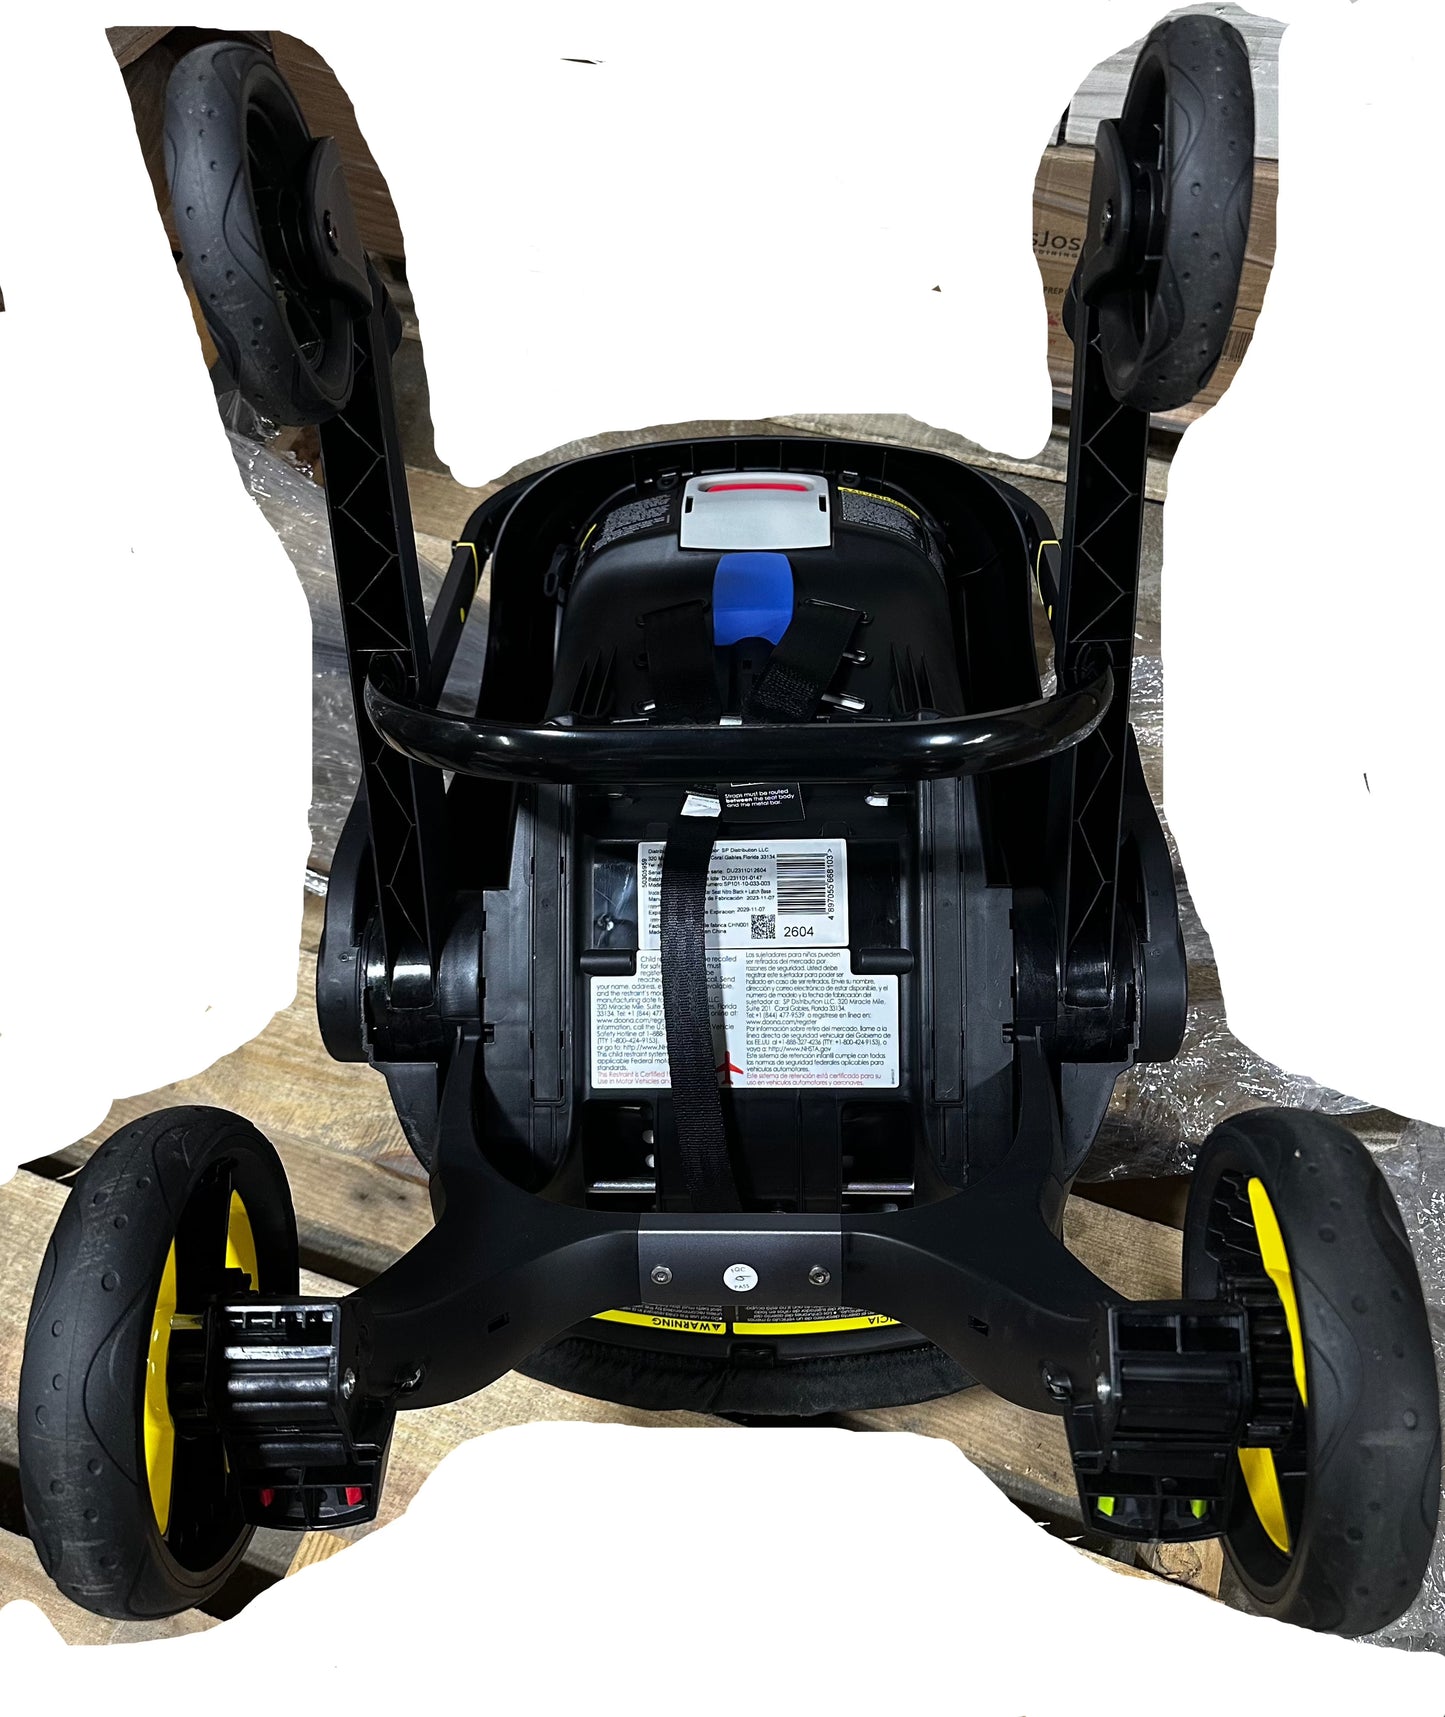 Doona Infant Car Seat & Latch Base Rear Facing Car Seat to Stroller in Seconds Nitro Black (11/23)